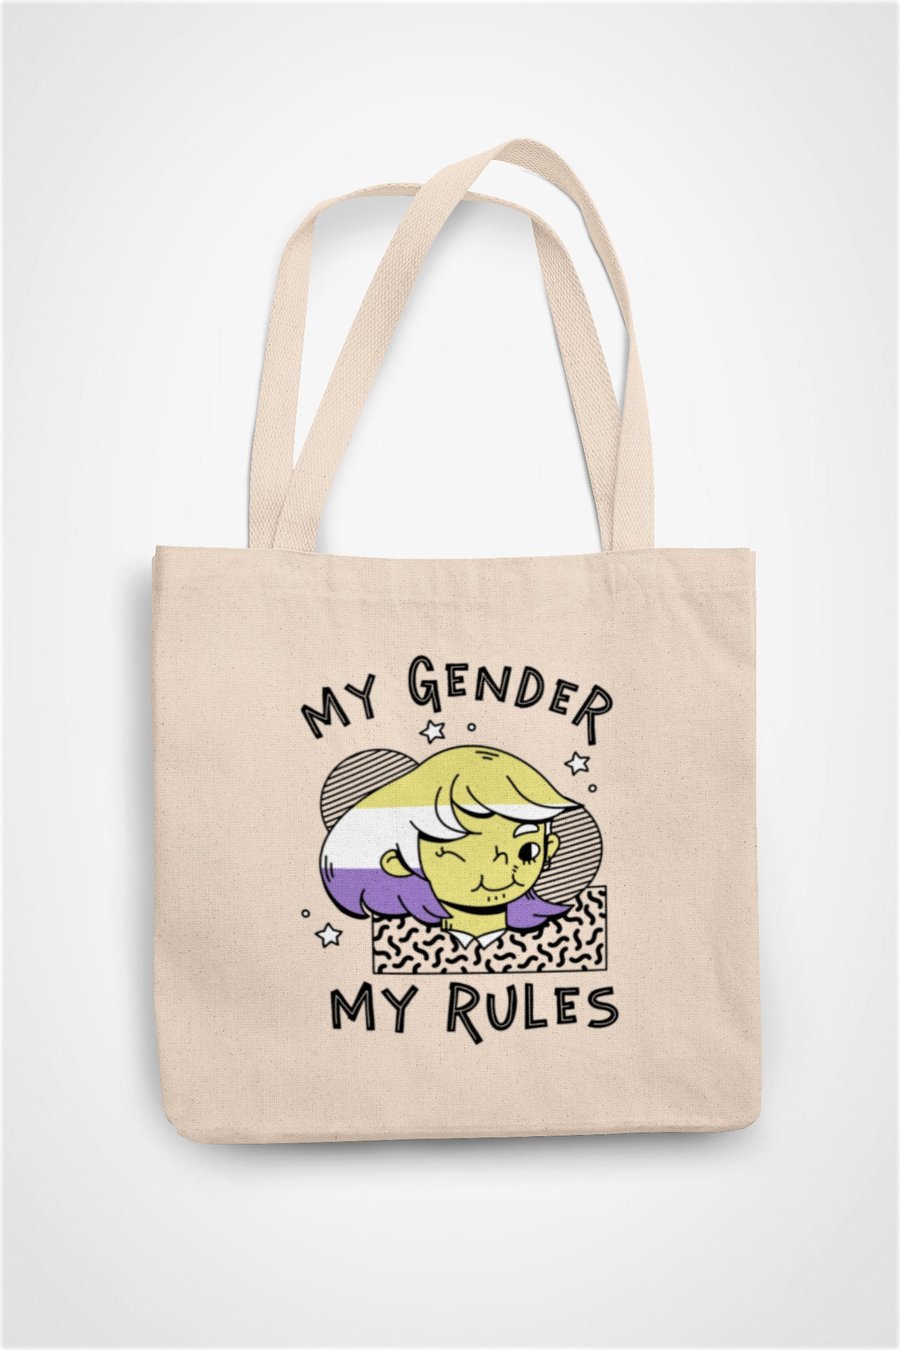 My Gender My Rules Tote Bag Non Binary Funny Novelty Gift For Family Friend 